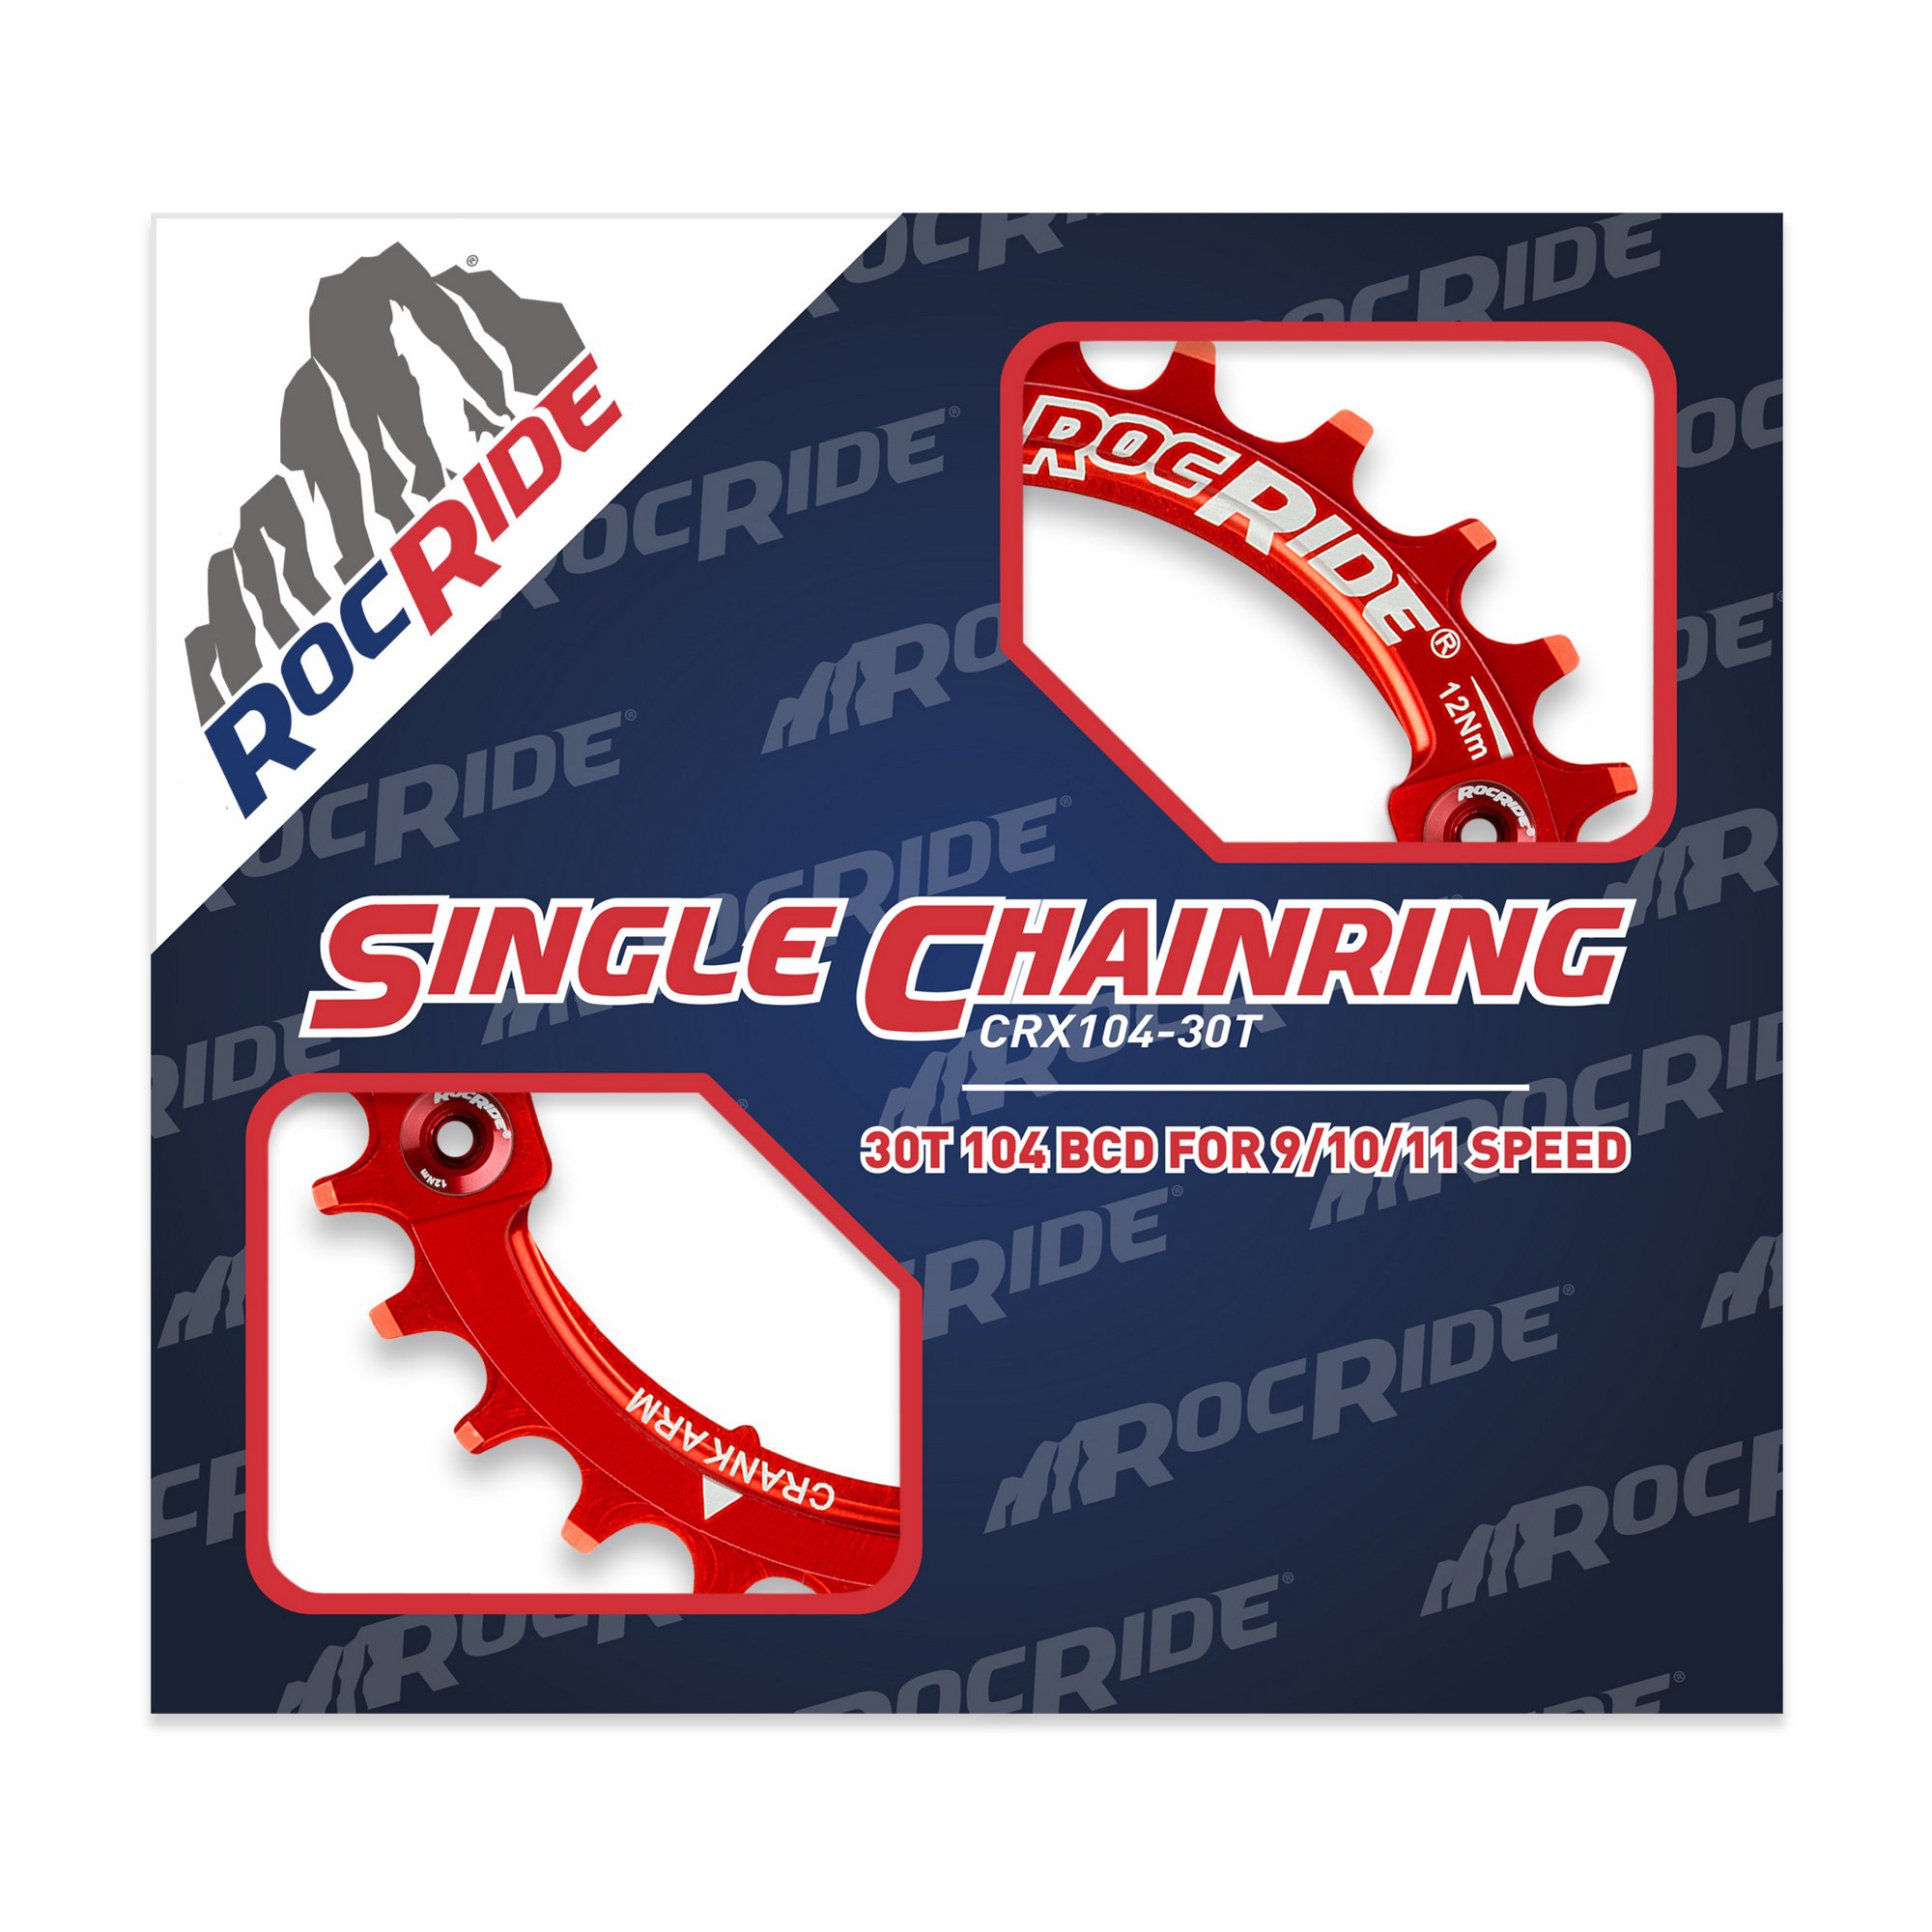 30T Narrow Wide Chainring 104 BCD Red Aluminum With 4 Red Aluminum Bolts By RocRide For 9/10/11 Speed. - image 2 of 5